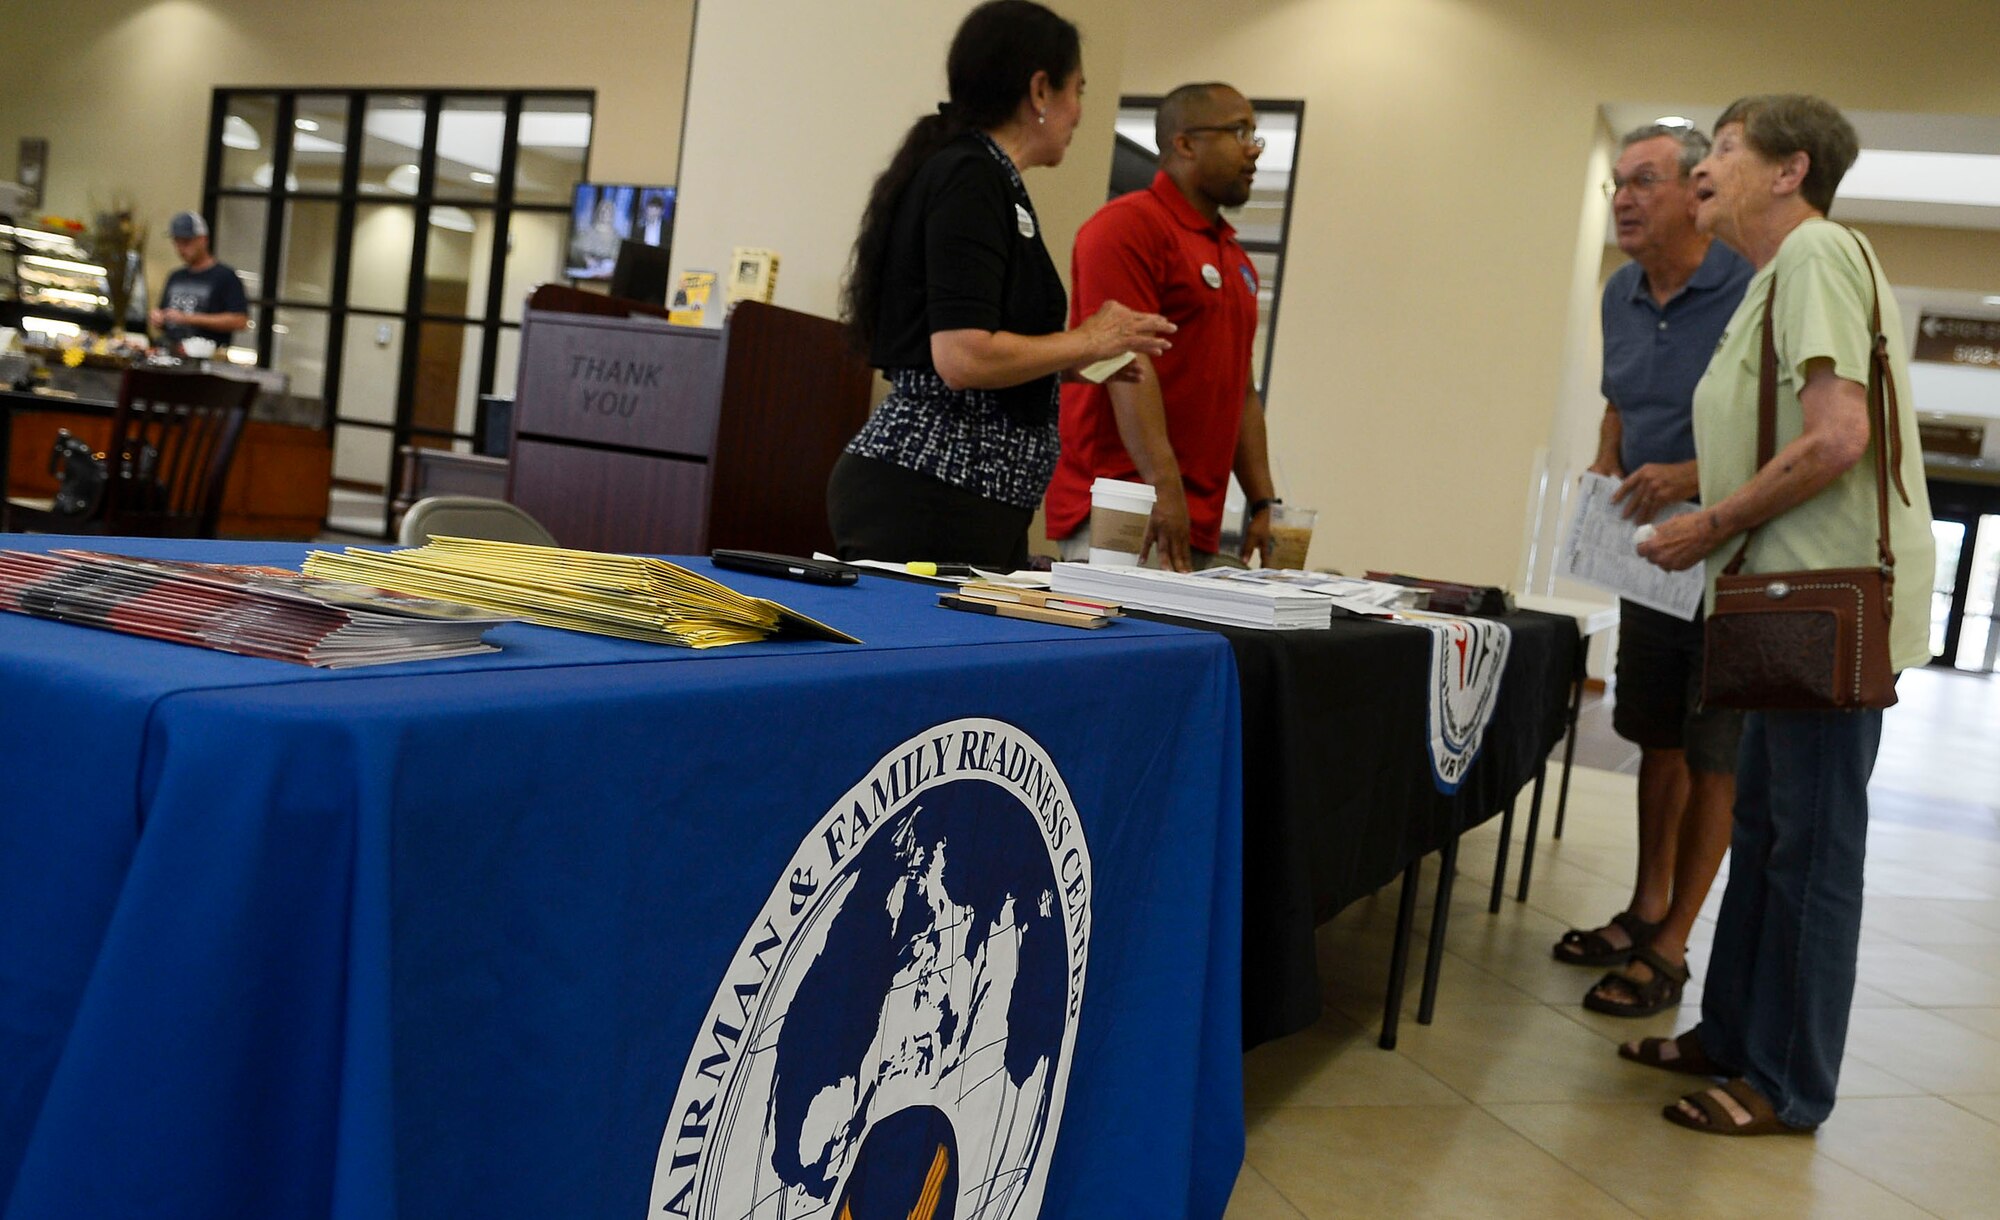 Nelly Richards and Thamers Jones, members assigned to the 6th Force Support Squadron Airman and Family Services Flight, informs evacuees of available services at MacDill Air Force Base, Fla., Oct. 7, 2016. In addition to providing lodging to the evacuees, the MacDill Lanes Bowling Alley provided free shoes and games, the Youth Center opened its gymnasium to provide displaced children with a place to play, and a free movie was offered at the base theater. (U.S. Air Force photo by Senior Airman Jenay Randolph)   